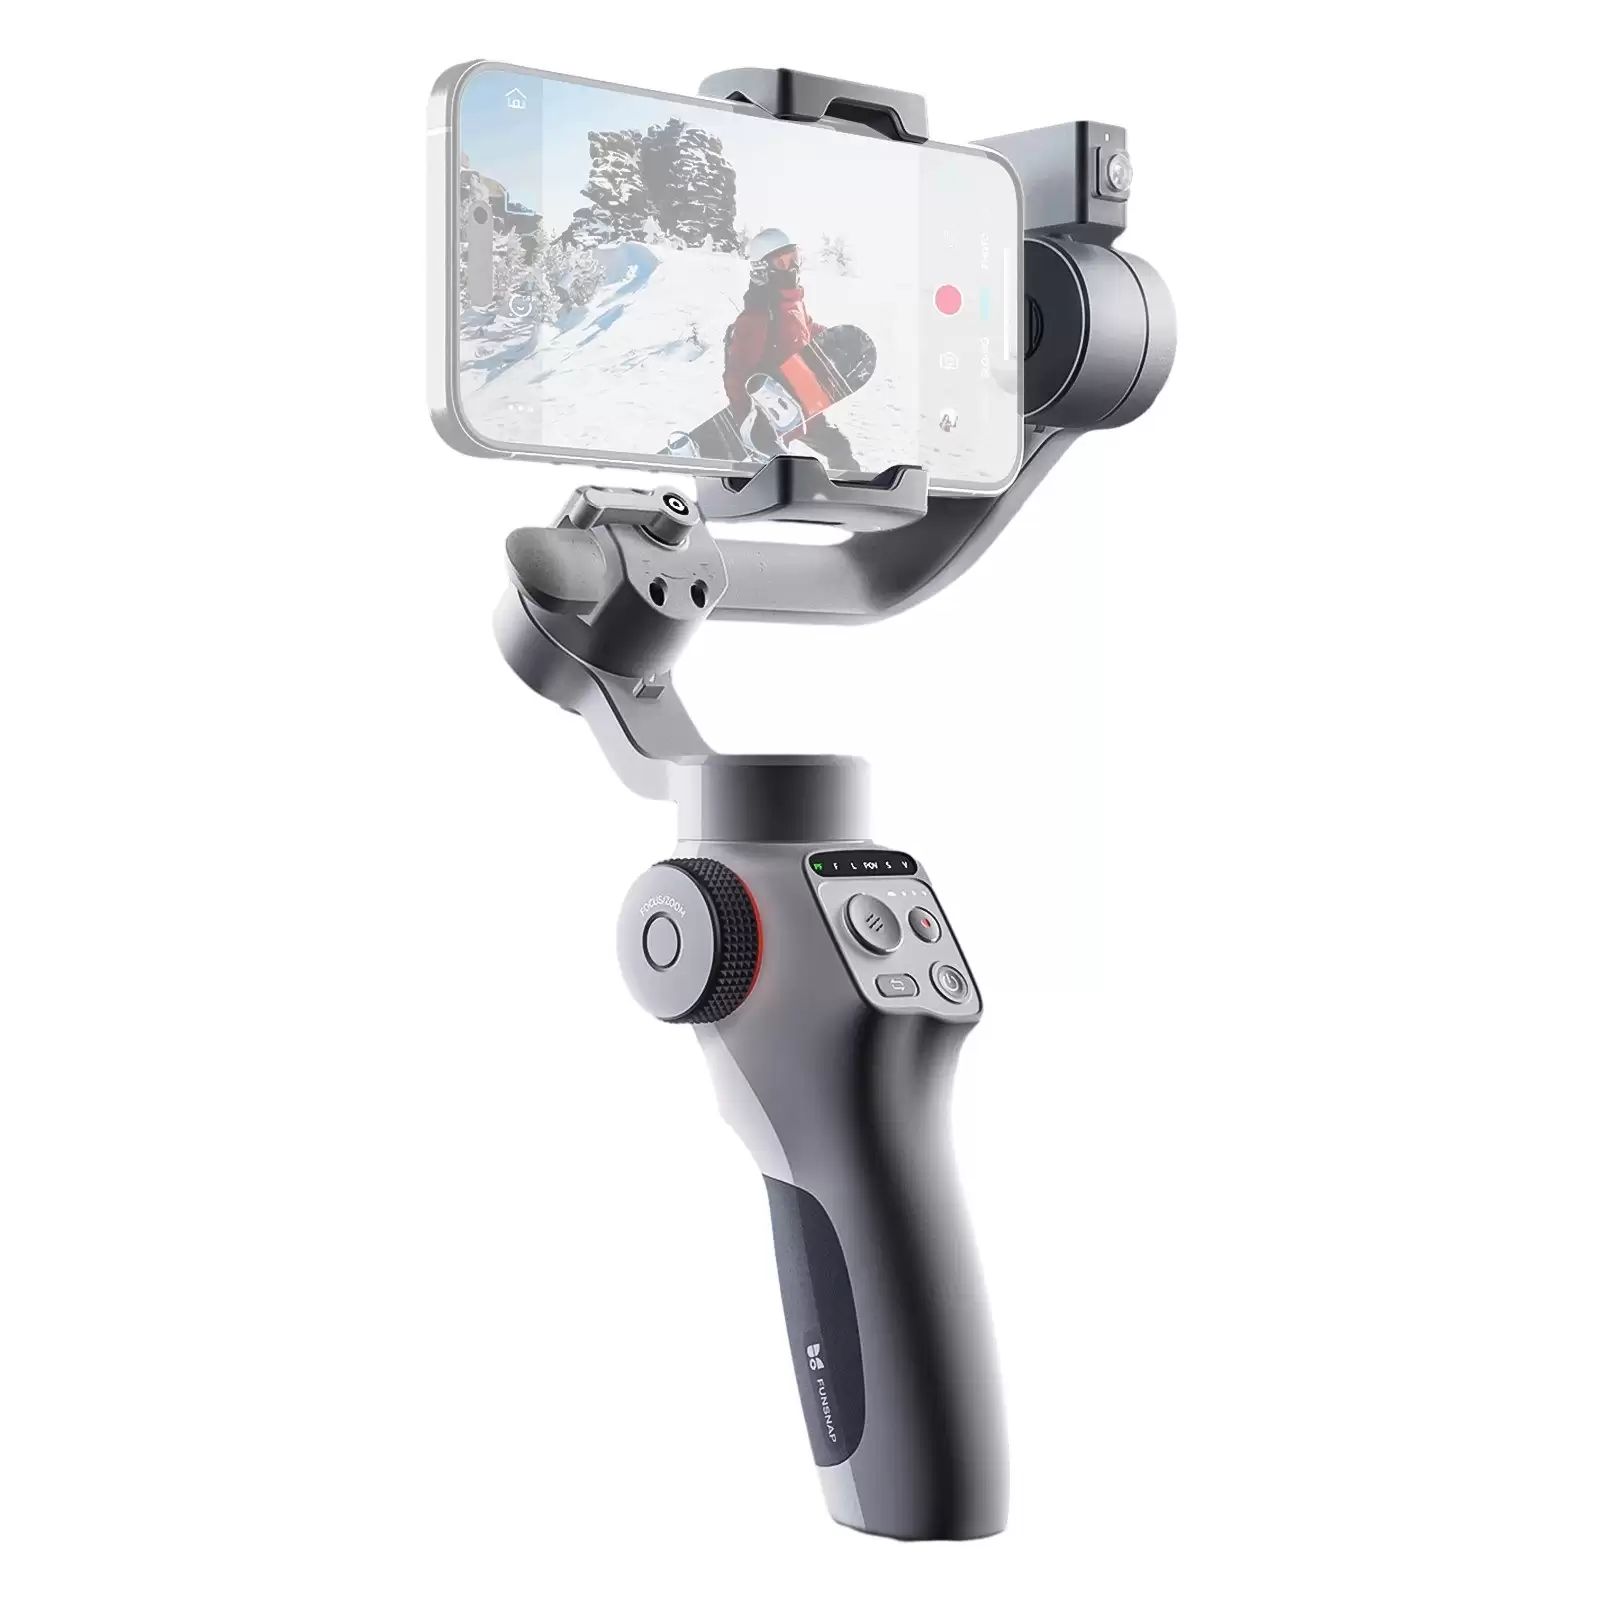 Order In Just $145 Funsnap Capture 5 3-Axis Stabilizer Gimbal With This Discount Coupon At Tomtop